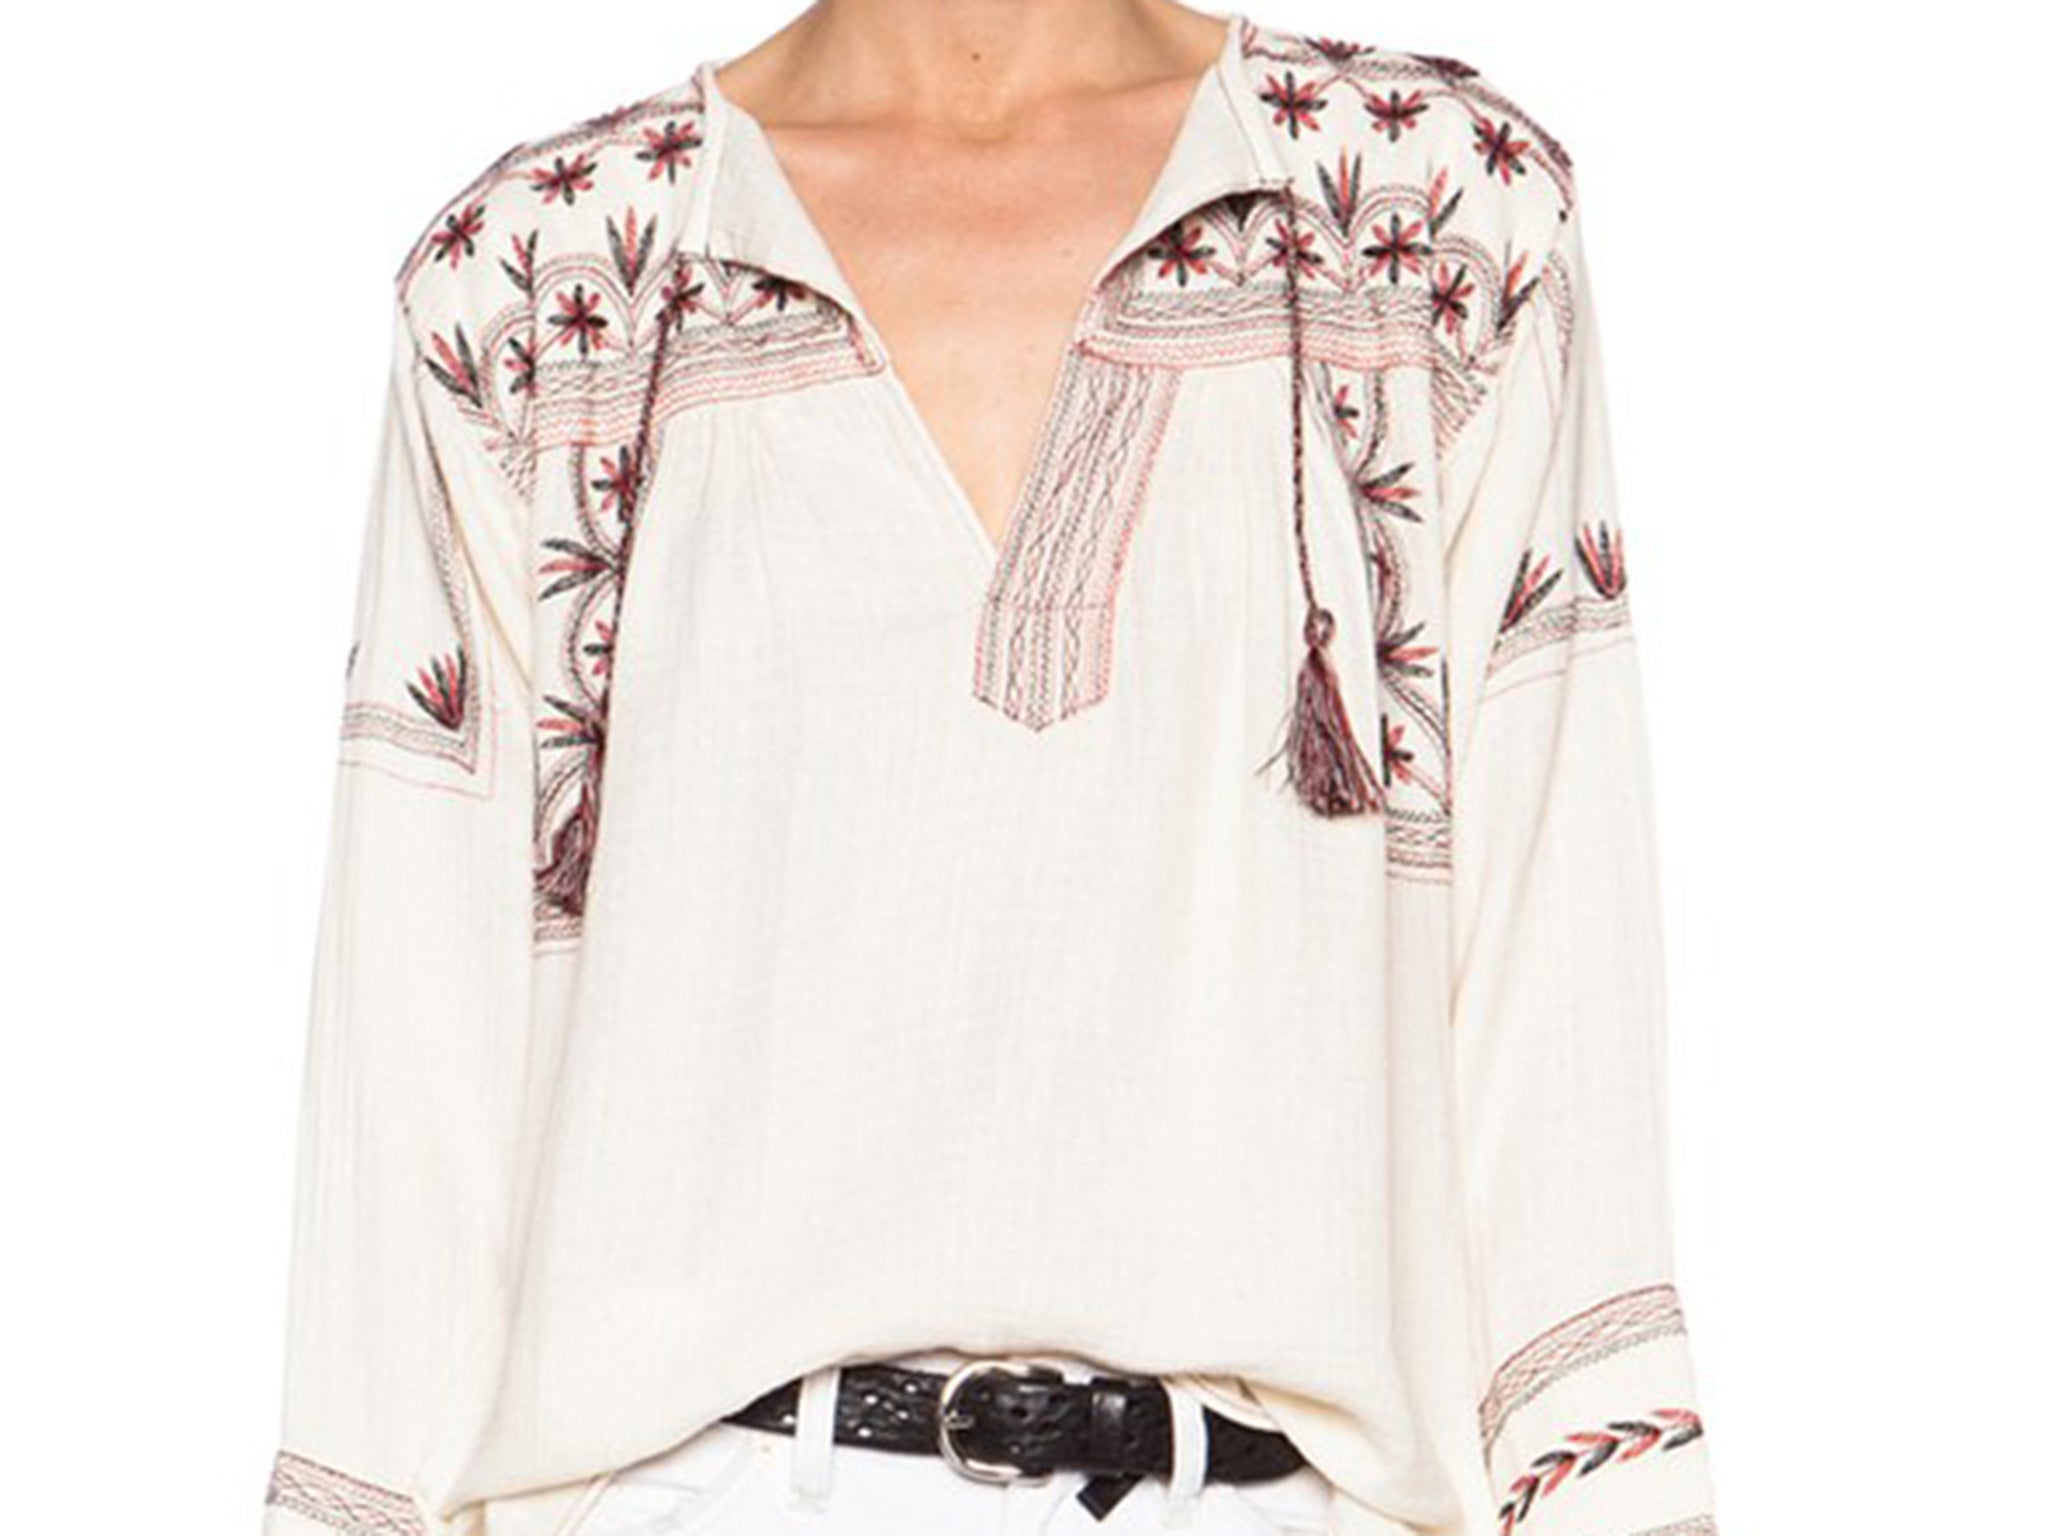 Isabel Marant's design in question